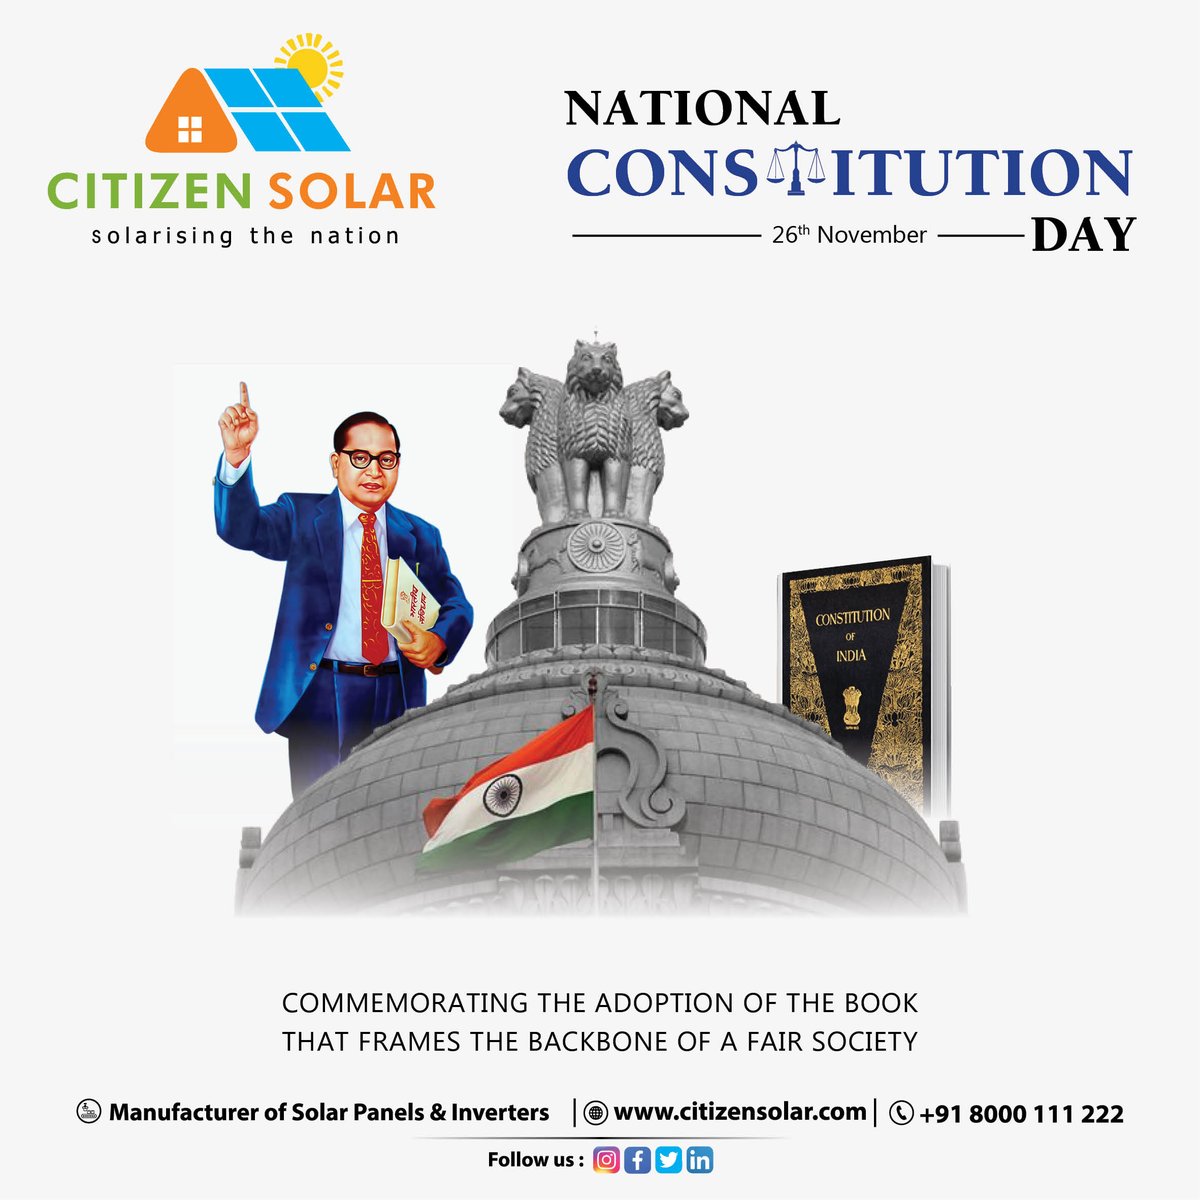 Empowerment through Sunlight, Inspired by the Constitution.

From Rights to Duties, Our Constitution Beauties.

#ConstitutionDay #constitutionofindia #savidhandiwas #Constitution #citizensolar #BabaSahebAmbedkar #solarpower #solarenergy #solarmanufacturing #indian #solarenergy